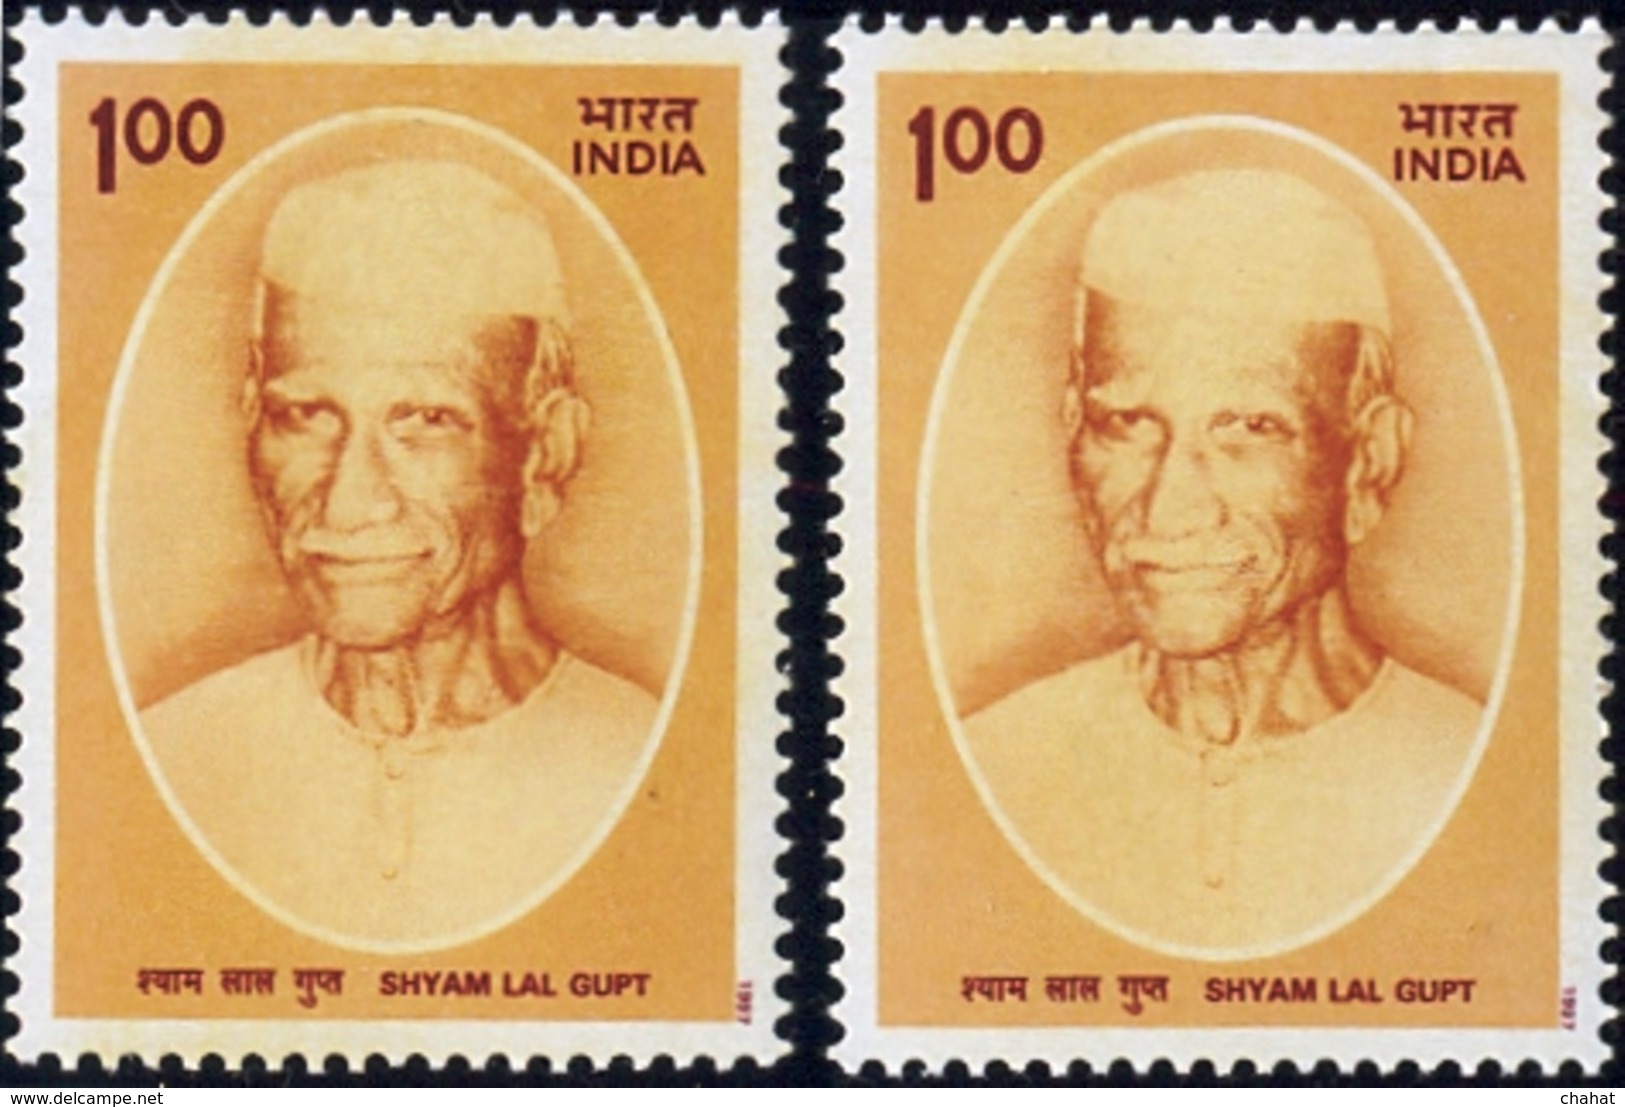 ERROR-COLOR VARIETY-FAMOUS PEOPLE-SHYAM LAL GUPT-INDIA-MNH-H1-09A - Errors, Freaks & Oddities (EFO)